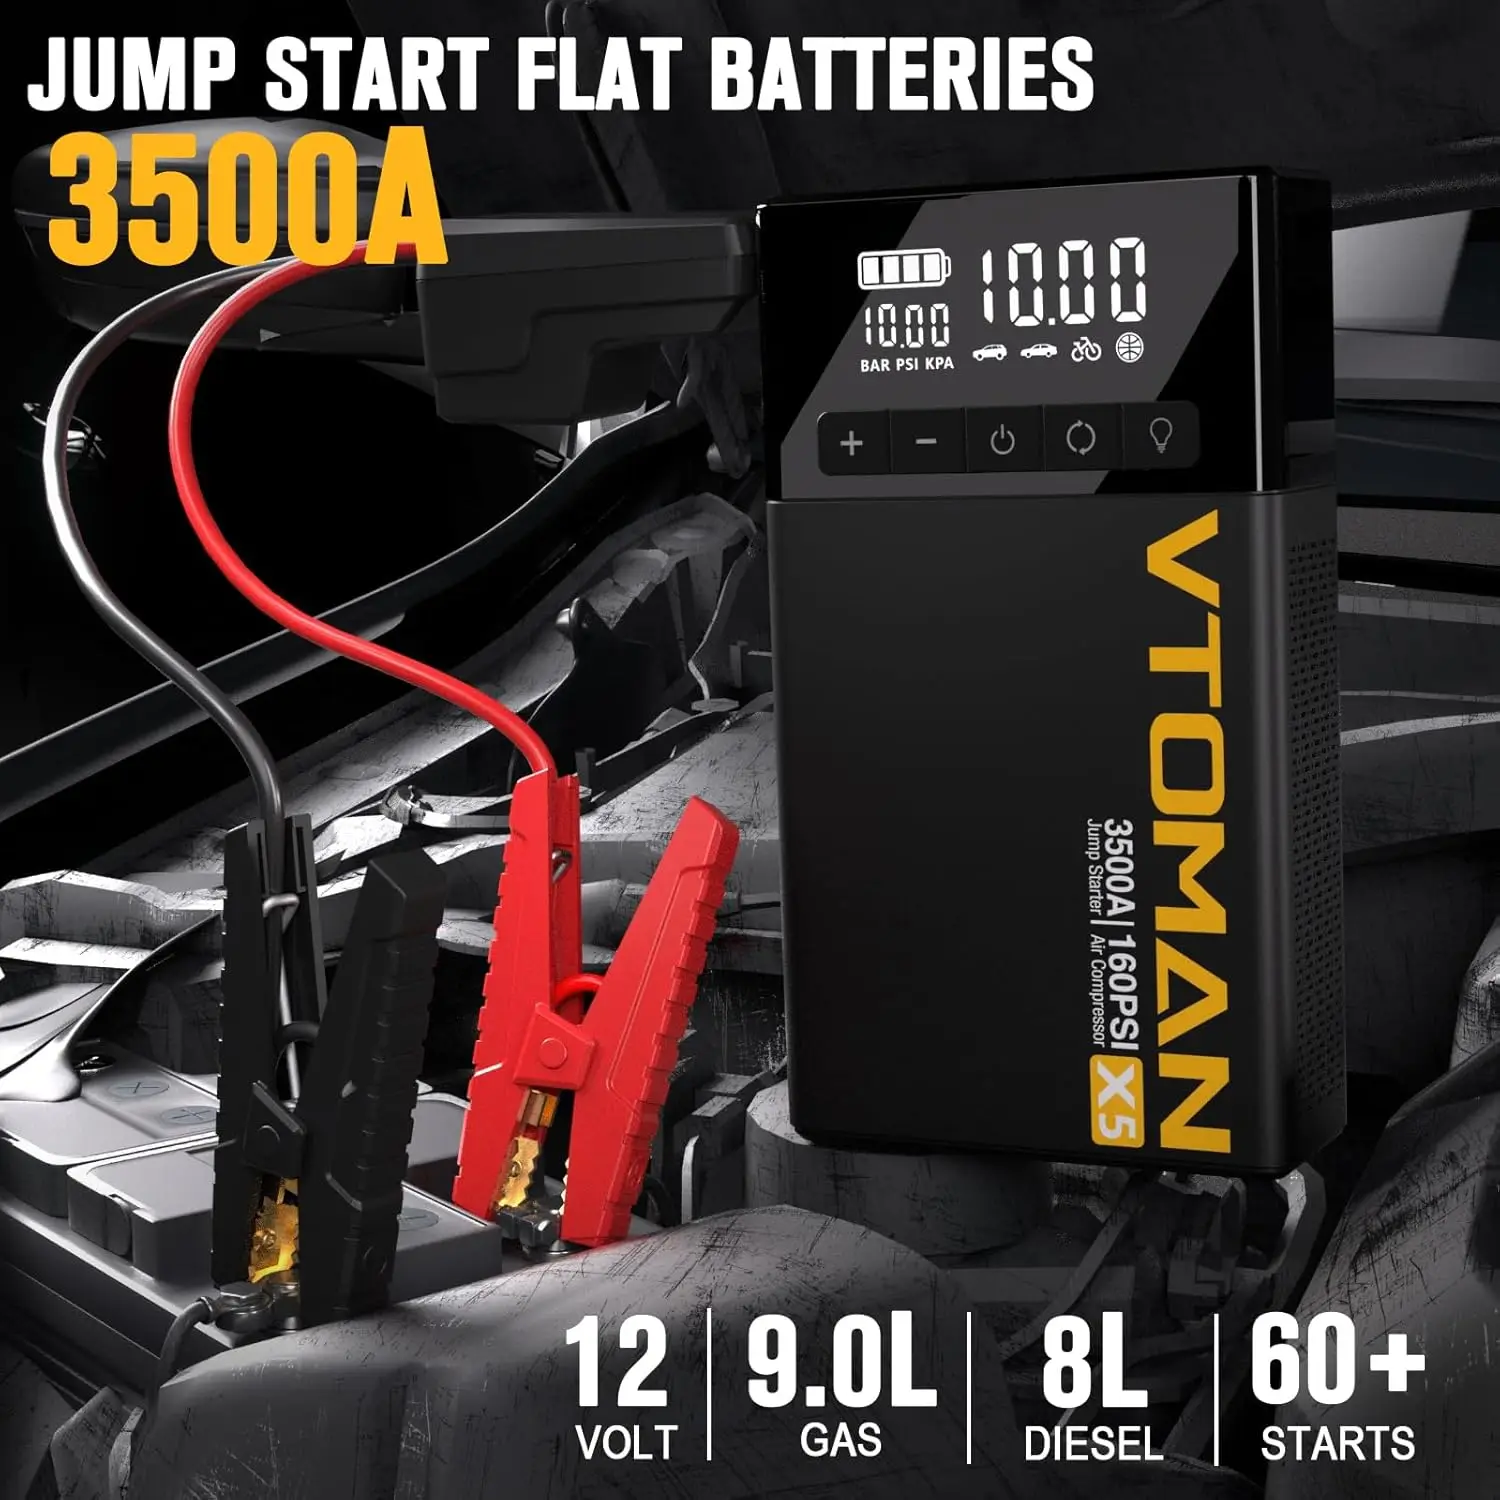 

X5 Jump Starter with Air Compressor, 3500A Portable Car Battery Booster (Up to 9L Gas/8L Diesel Engines)